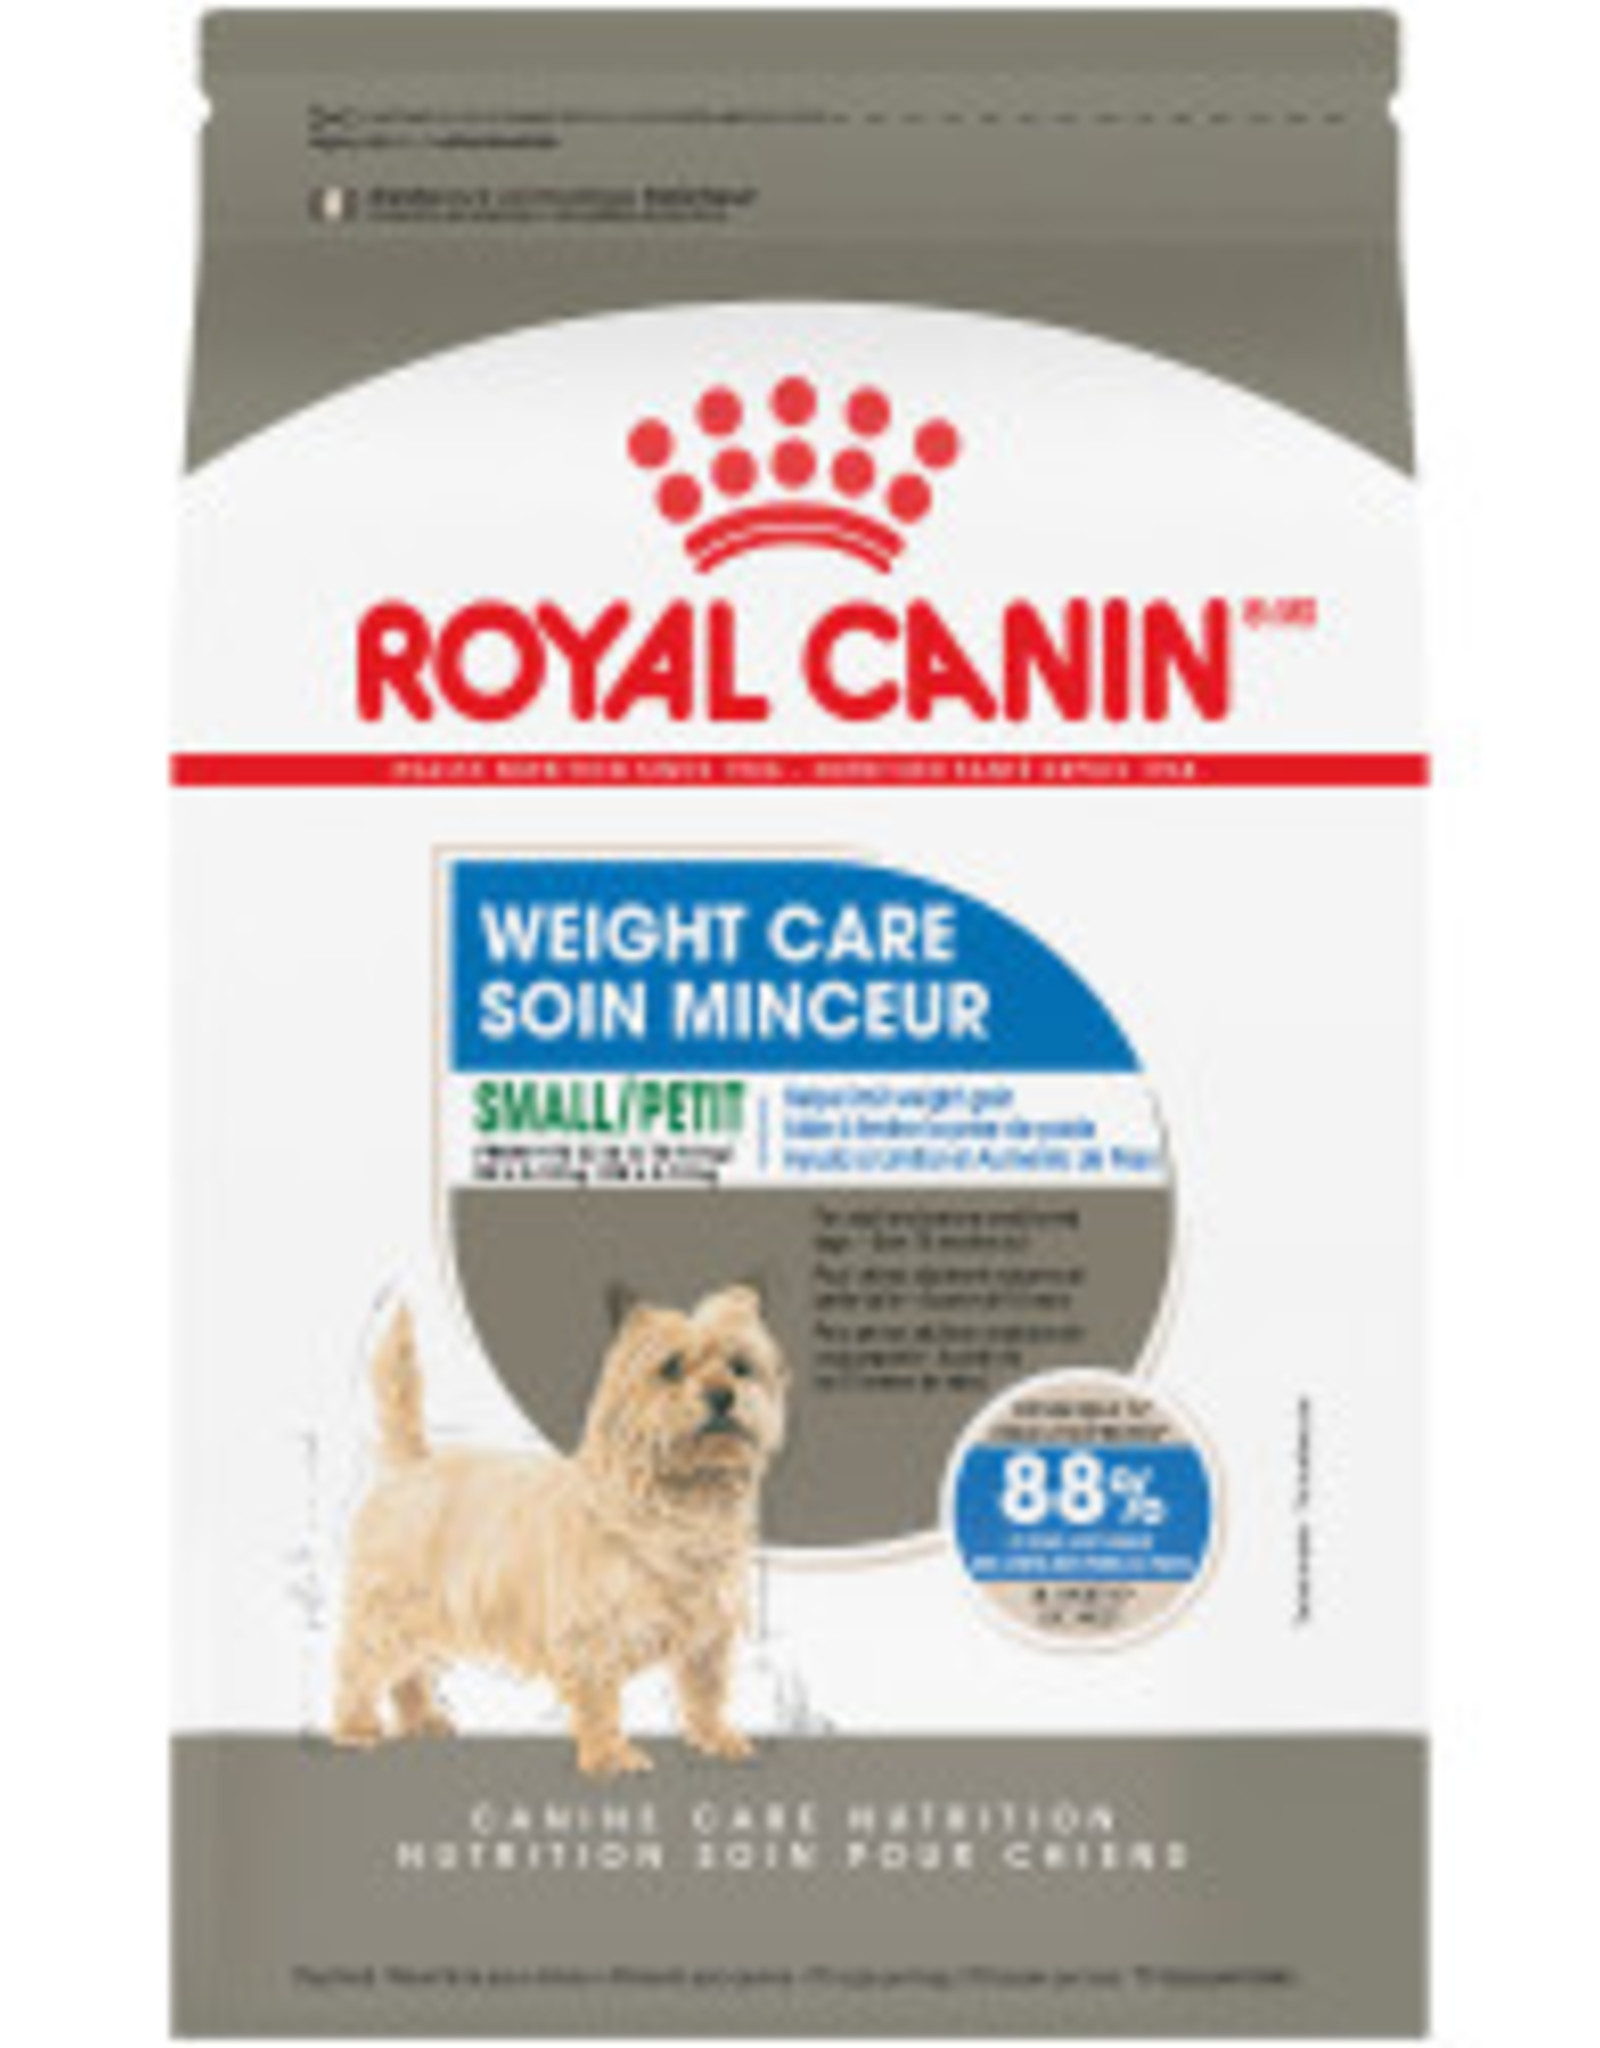 ROYAL CANIN ROYAL CANIN DOG SMALL WEIGHT CARE 2.5LBS